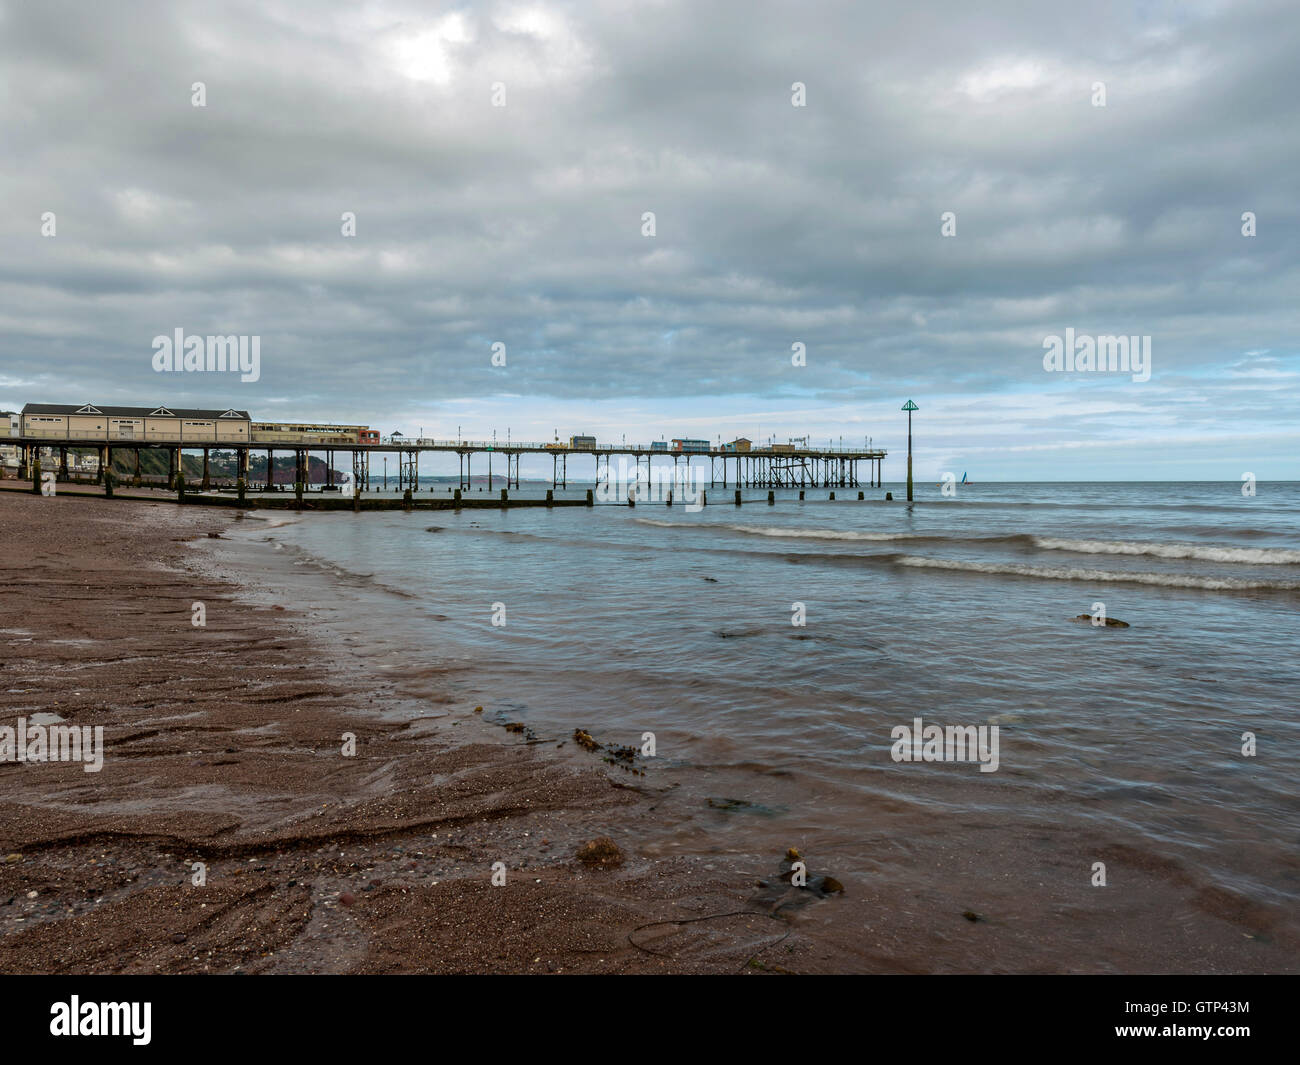 Landscape depicting the seashore along Teignmouth beach at Teignmouth, with views of the Grand Pier. Stock Photo